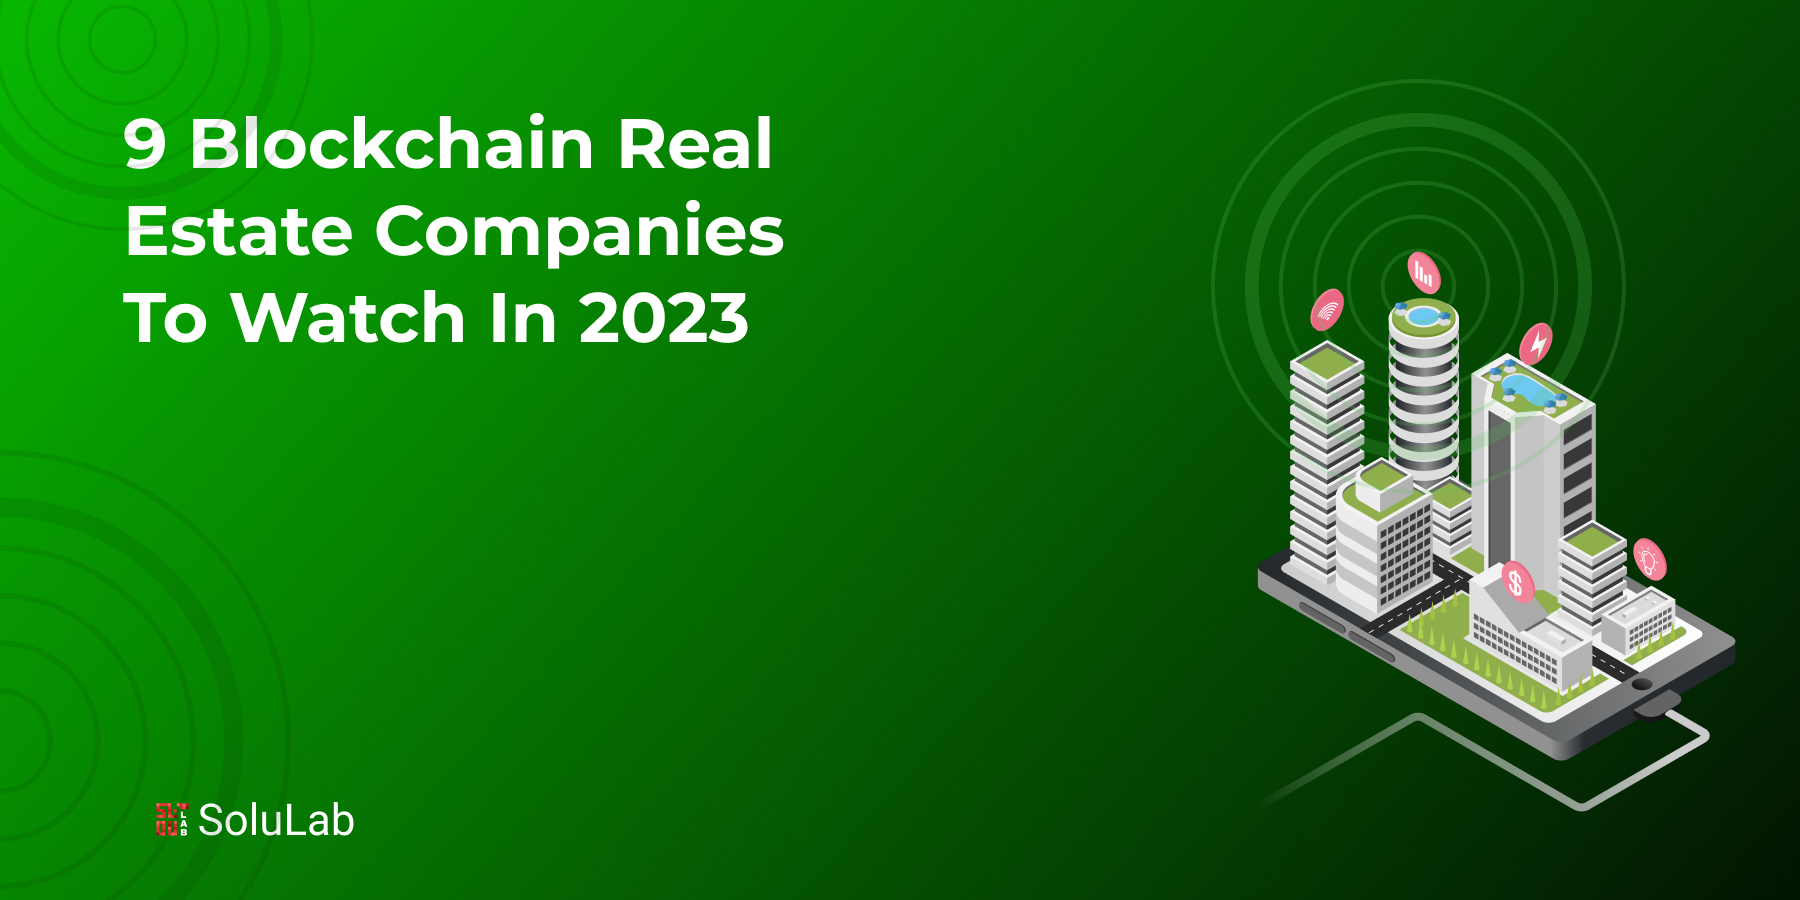 9 Blockchain Real Estate Companies to Watch in 2023